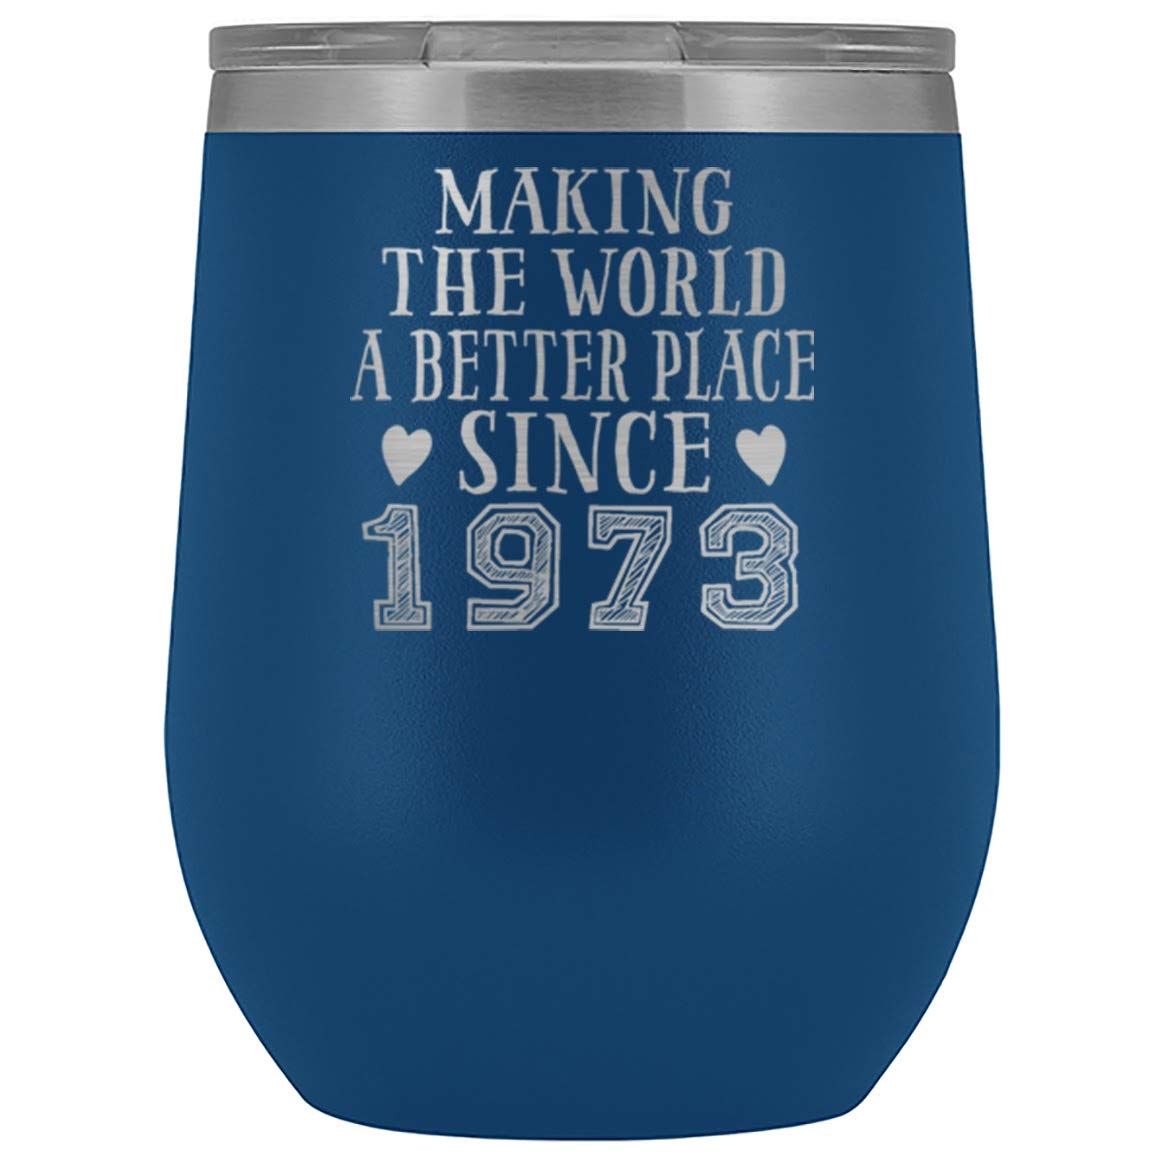 PAW8888 Making The World A Better Place 1973 51st Birthday Wine Tumbler Gifts for Men Women, Stainless Steel Wine Glass Holiday Xmas Gift for Him Her - Blue